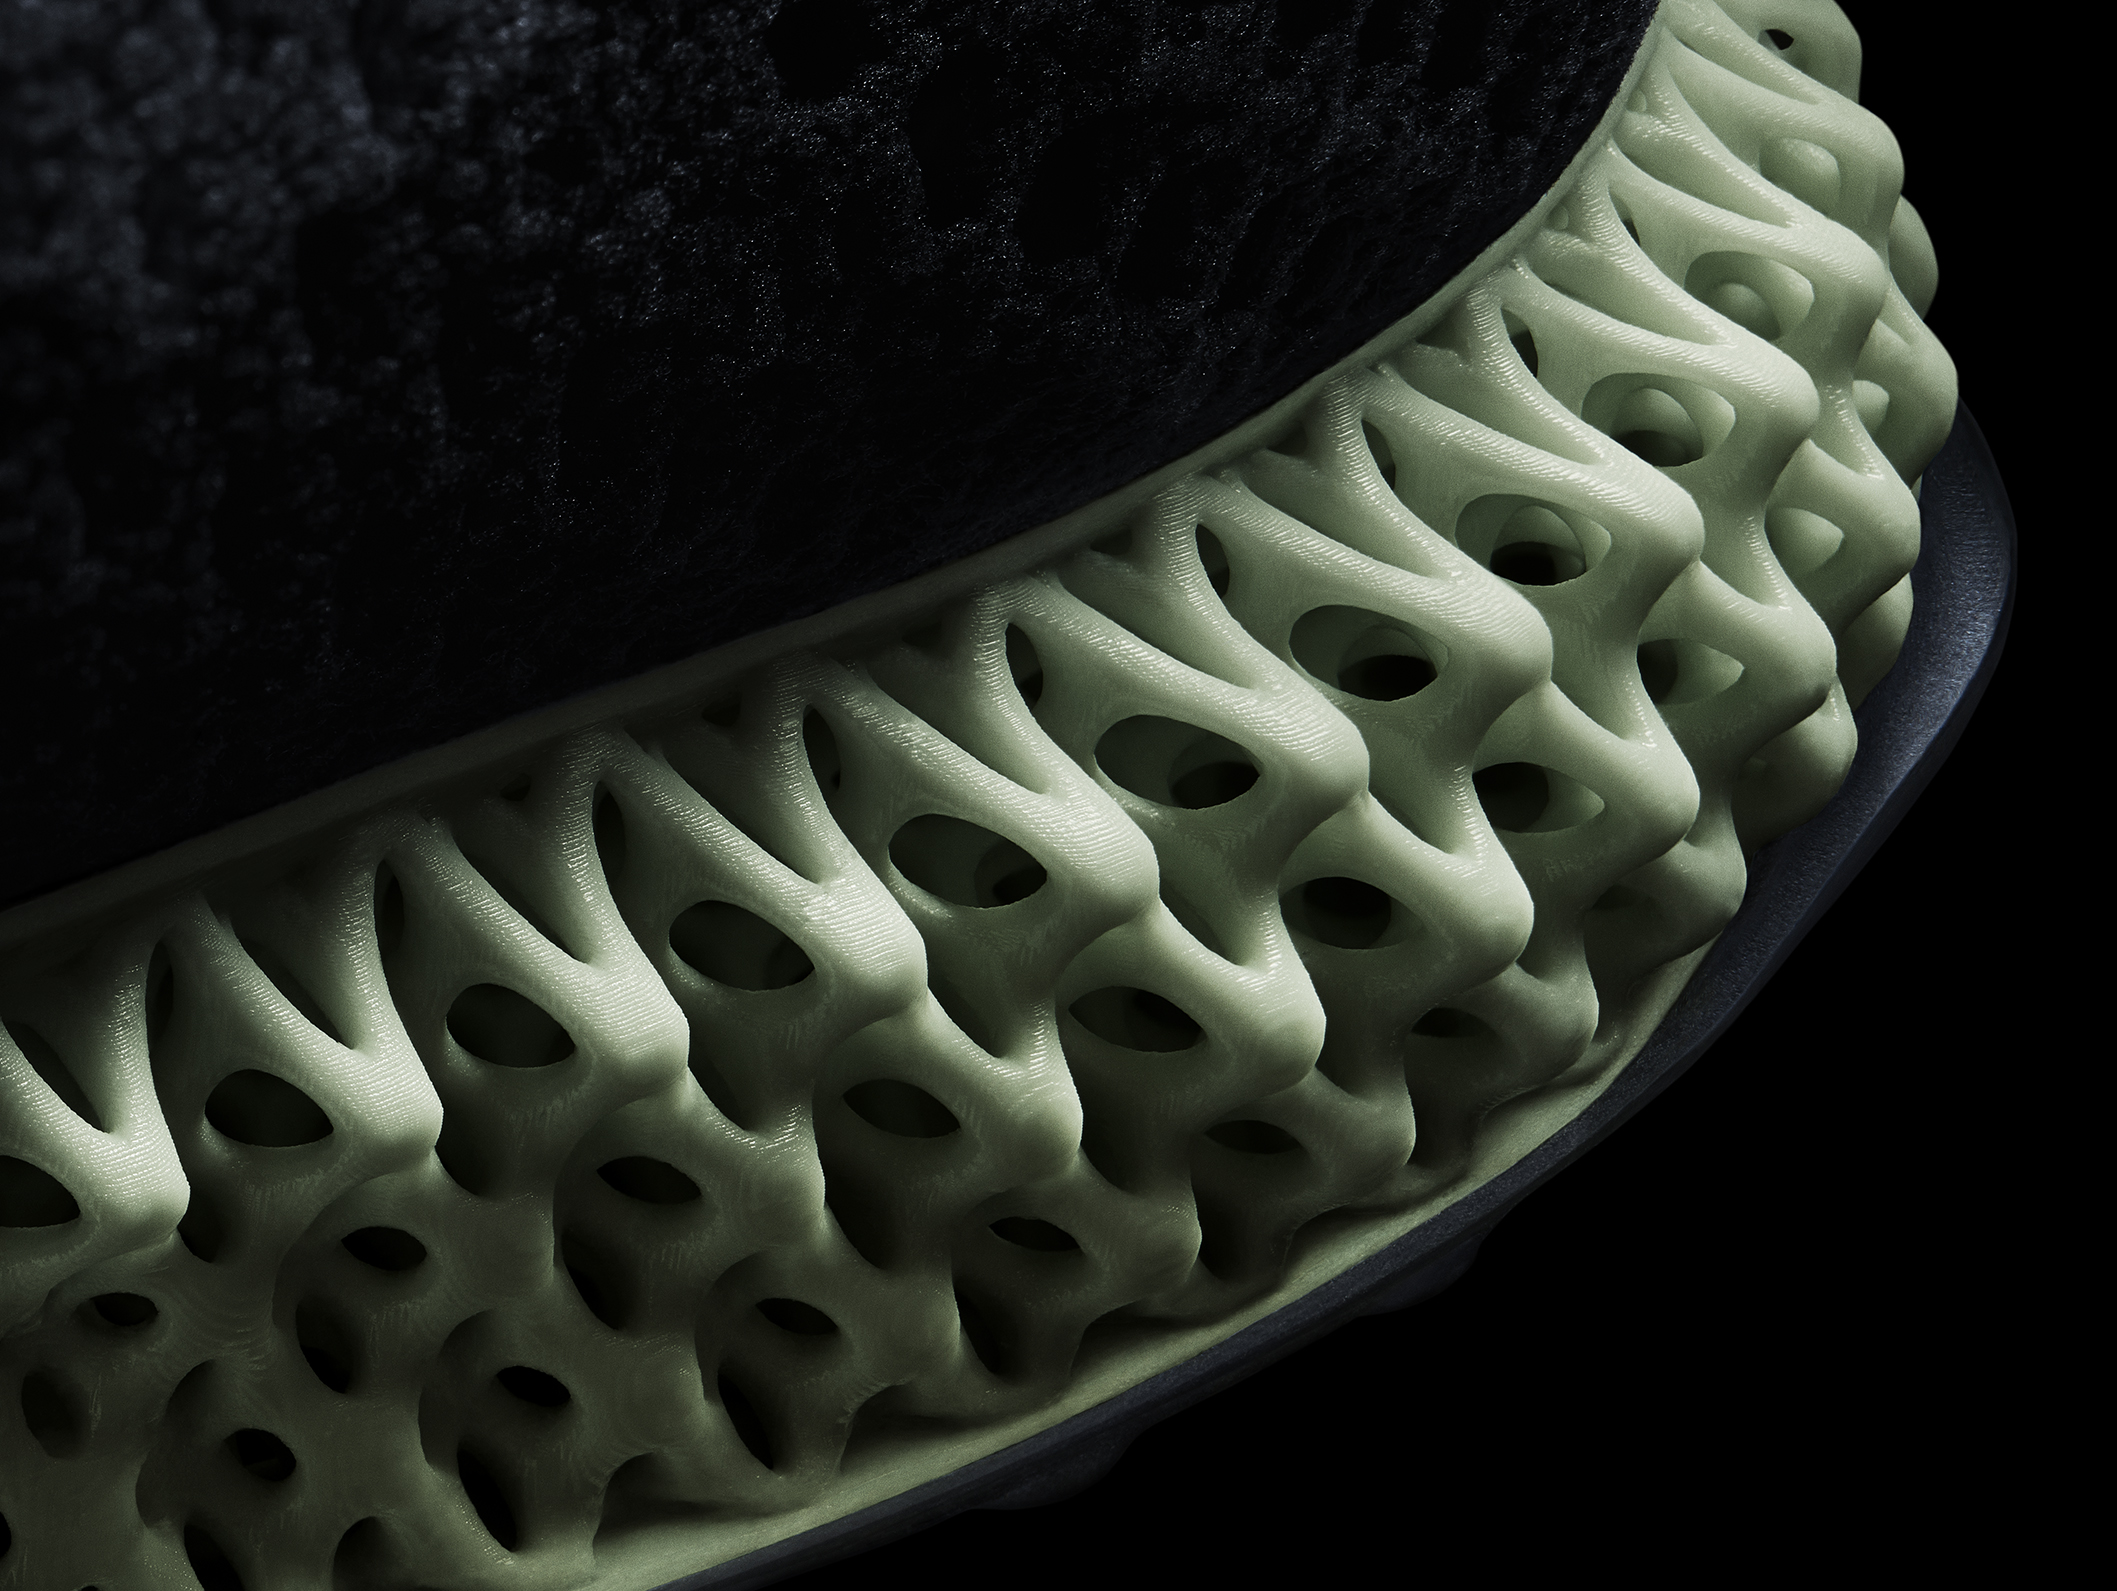 The honeycomb structure of the sole will help absorb stress.